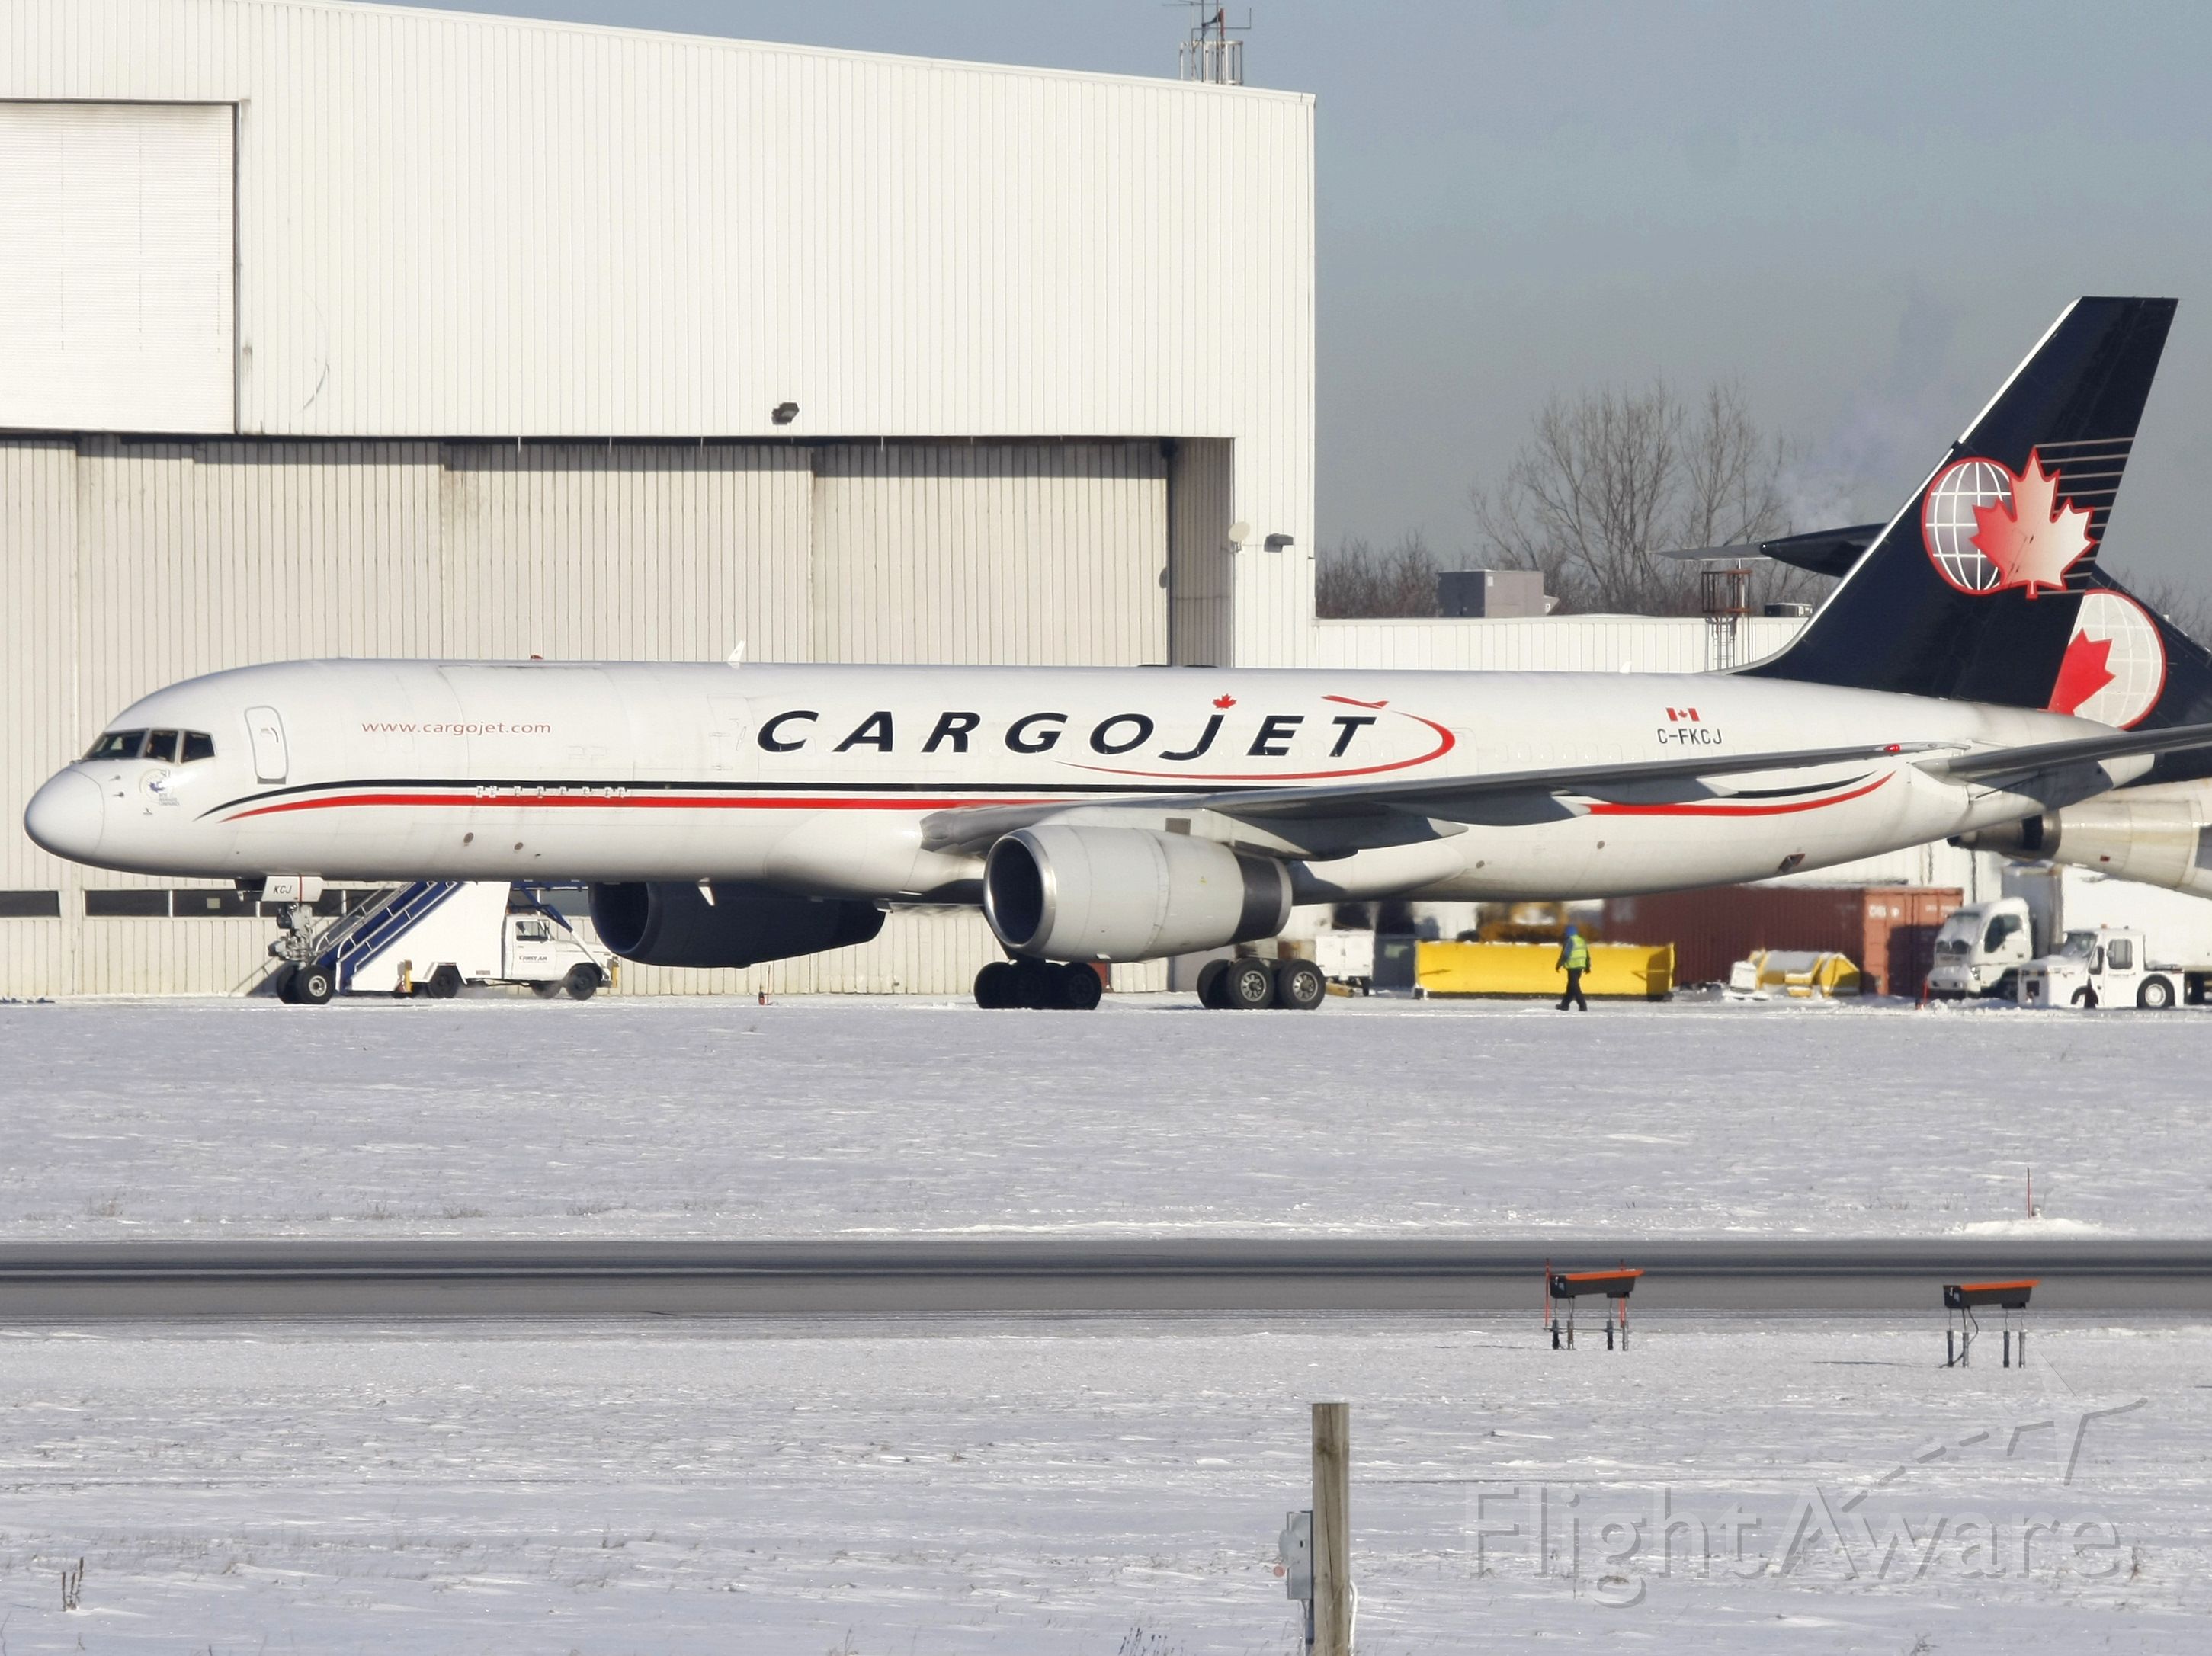 Boeing 757-200 (C-FKCJ) - Jan 17, 2011 - Taxiing to the de-icing bay